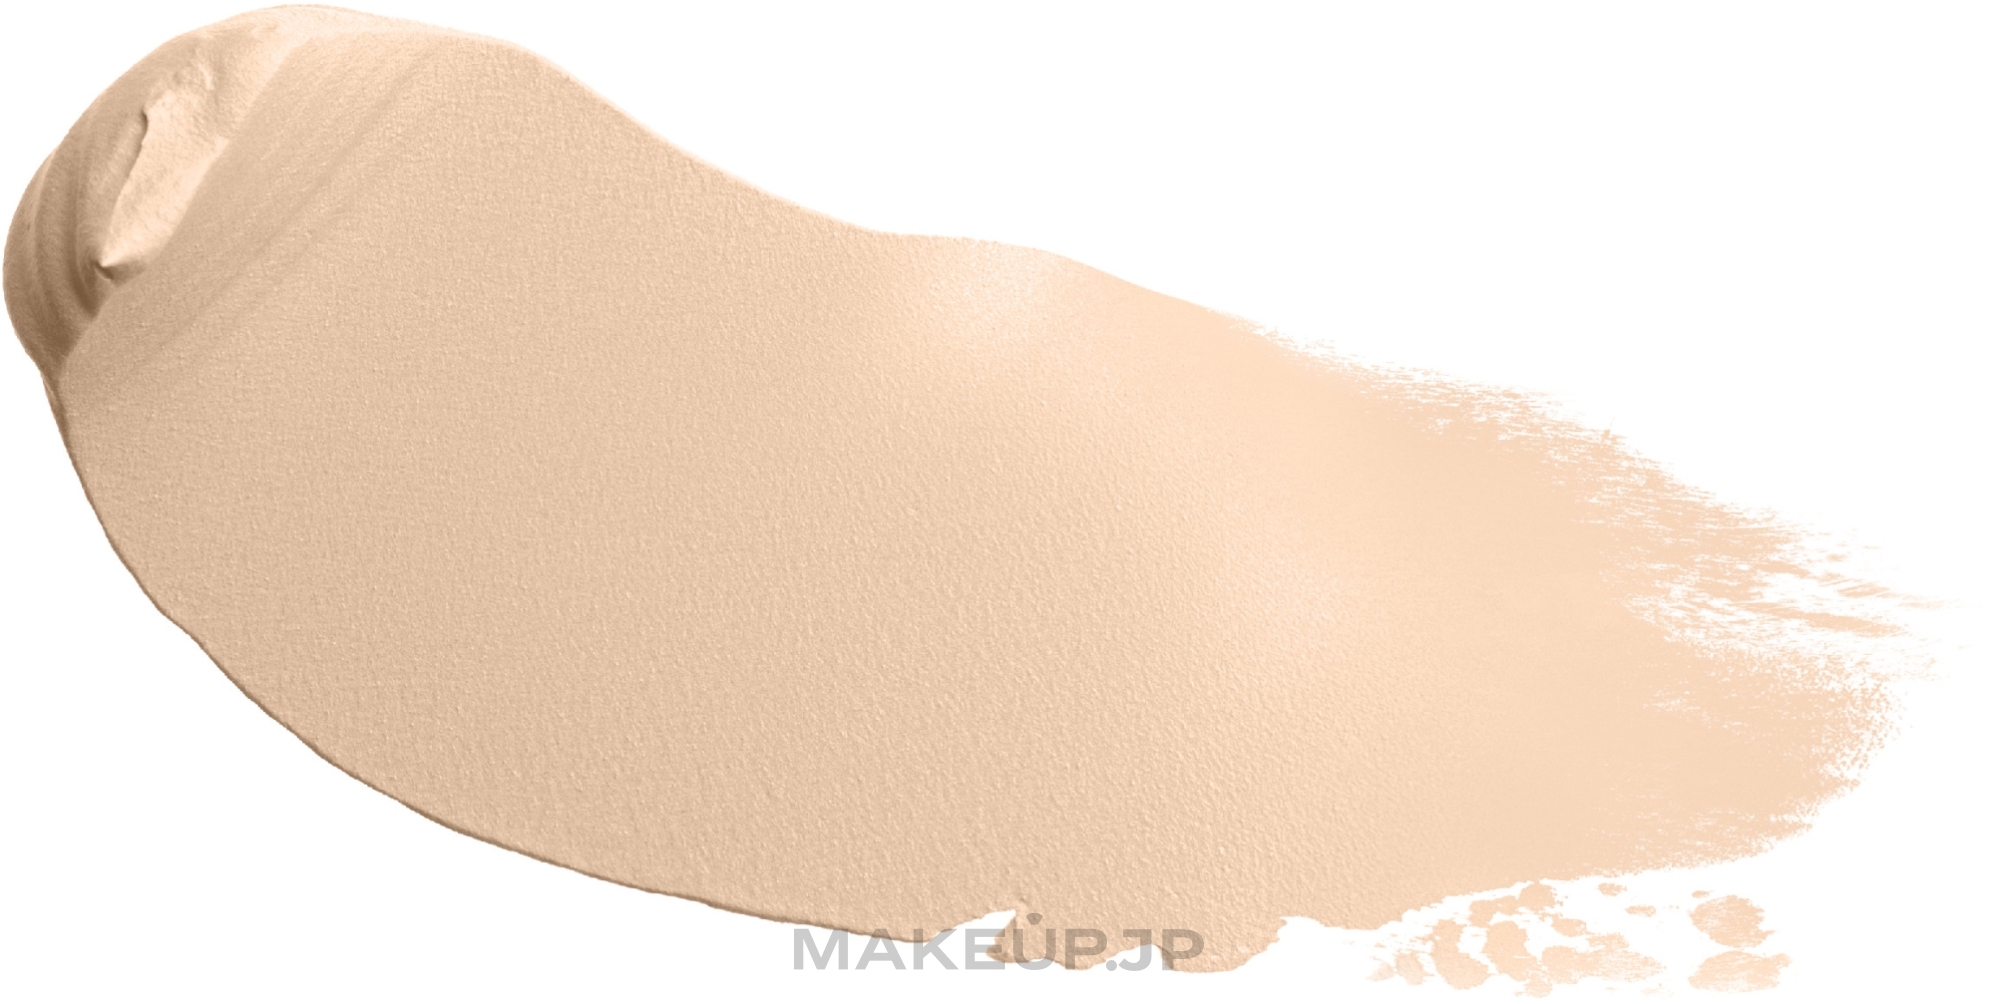 Mattifying Foundation 3D Correction - Vichy Dermablend 3D Correction — photo 15 - Opal